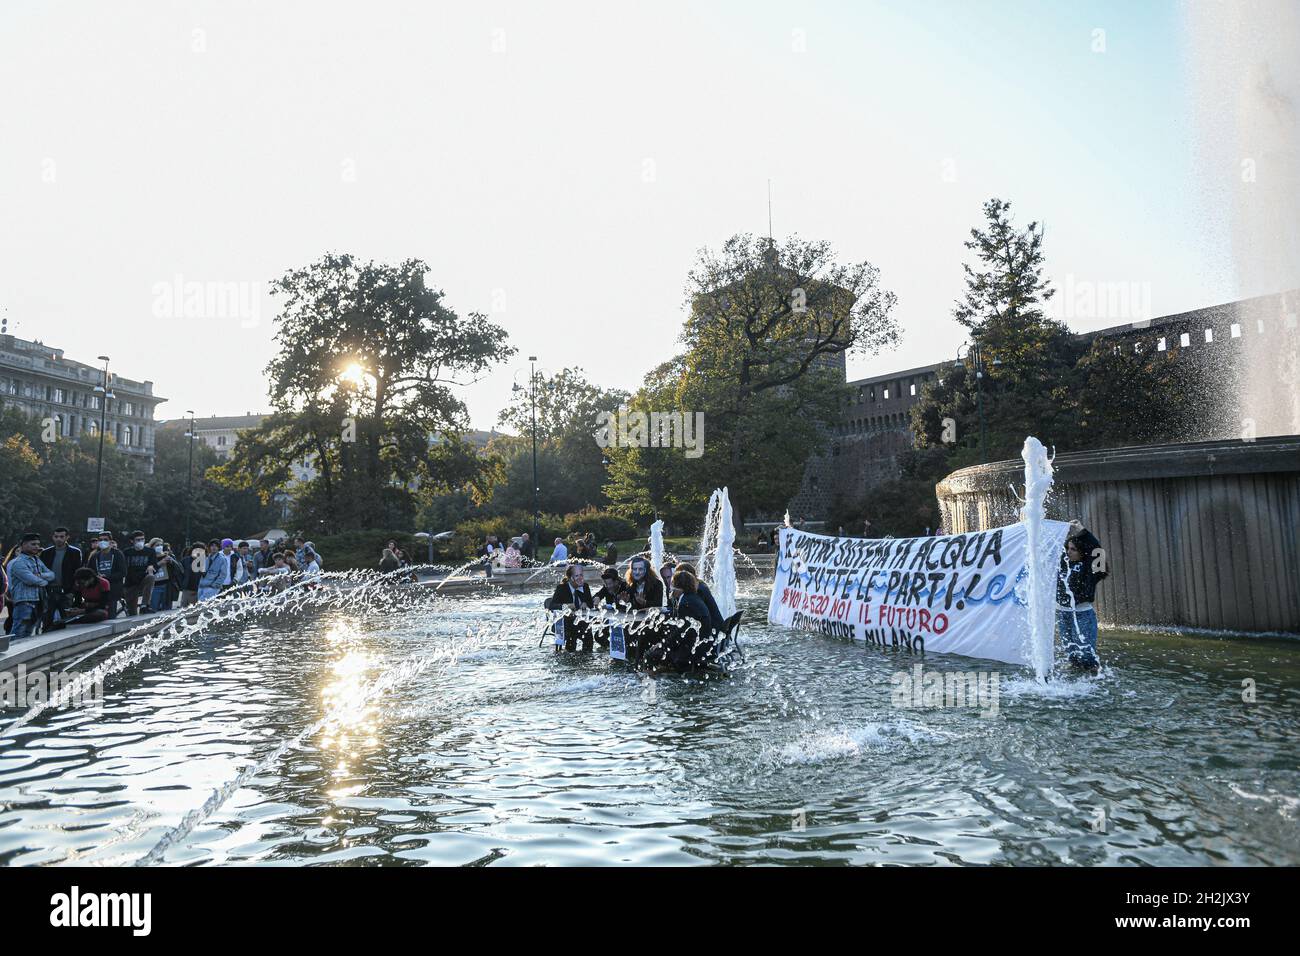 Milan, Italy. 22nd Oct, 2021. Milan, Italy - 22 October 2021: Fridays For Future climate activists wearing masks depicting world leaders, stage a flash mob in front of the Sforza Castle in preparation of the G20 Credit: Piero Cruciatti/Alamy Live News Stock Photo